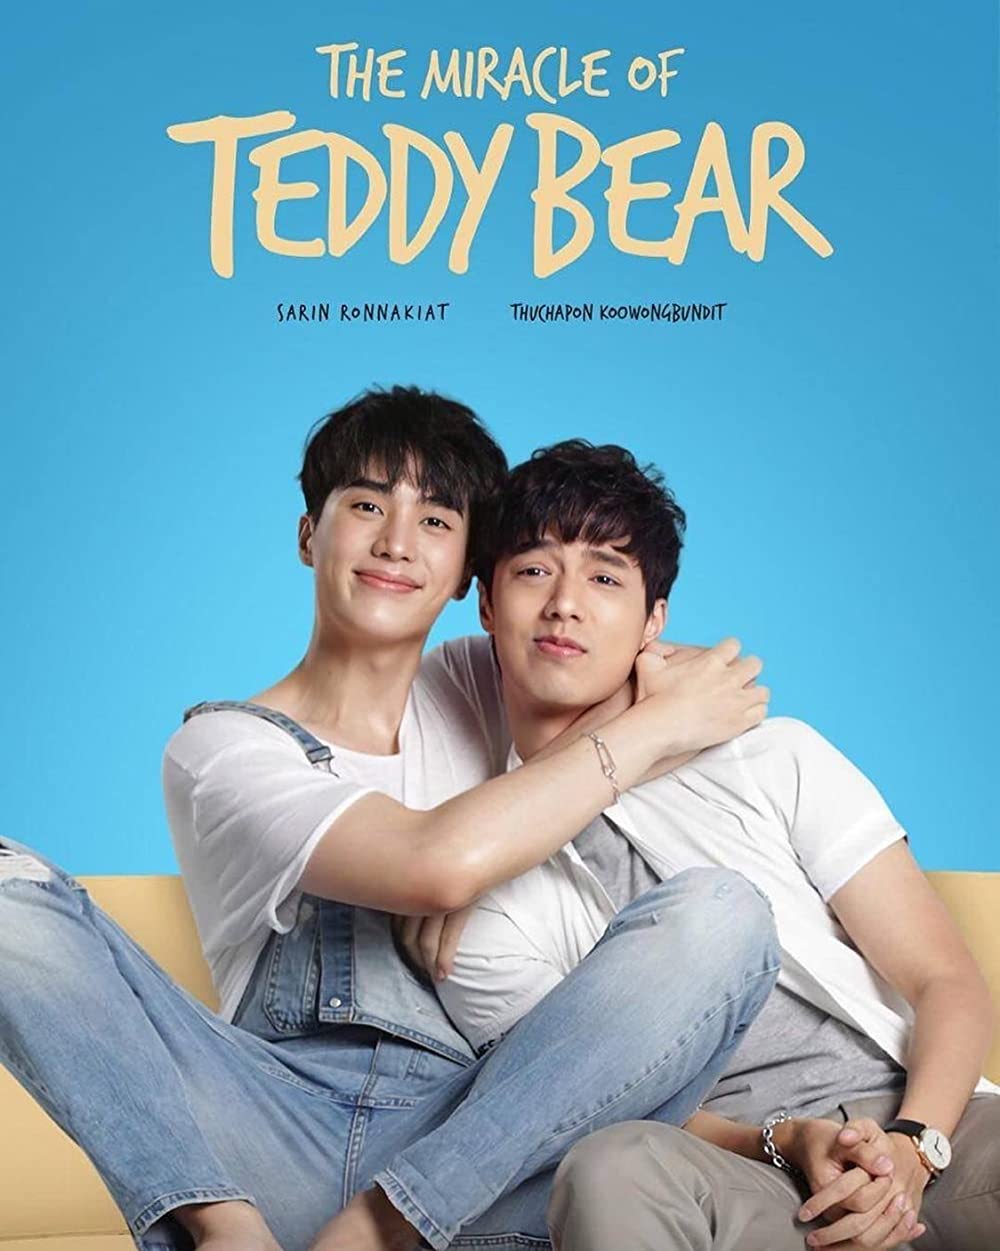 The Miracle of Teddy Bear: A Realistic Portrayal of a Gay Man’s Life